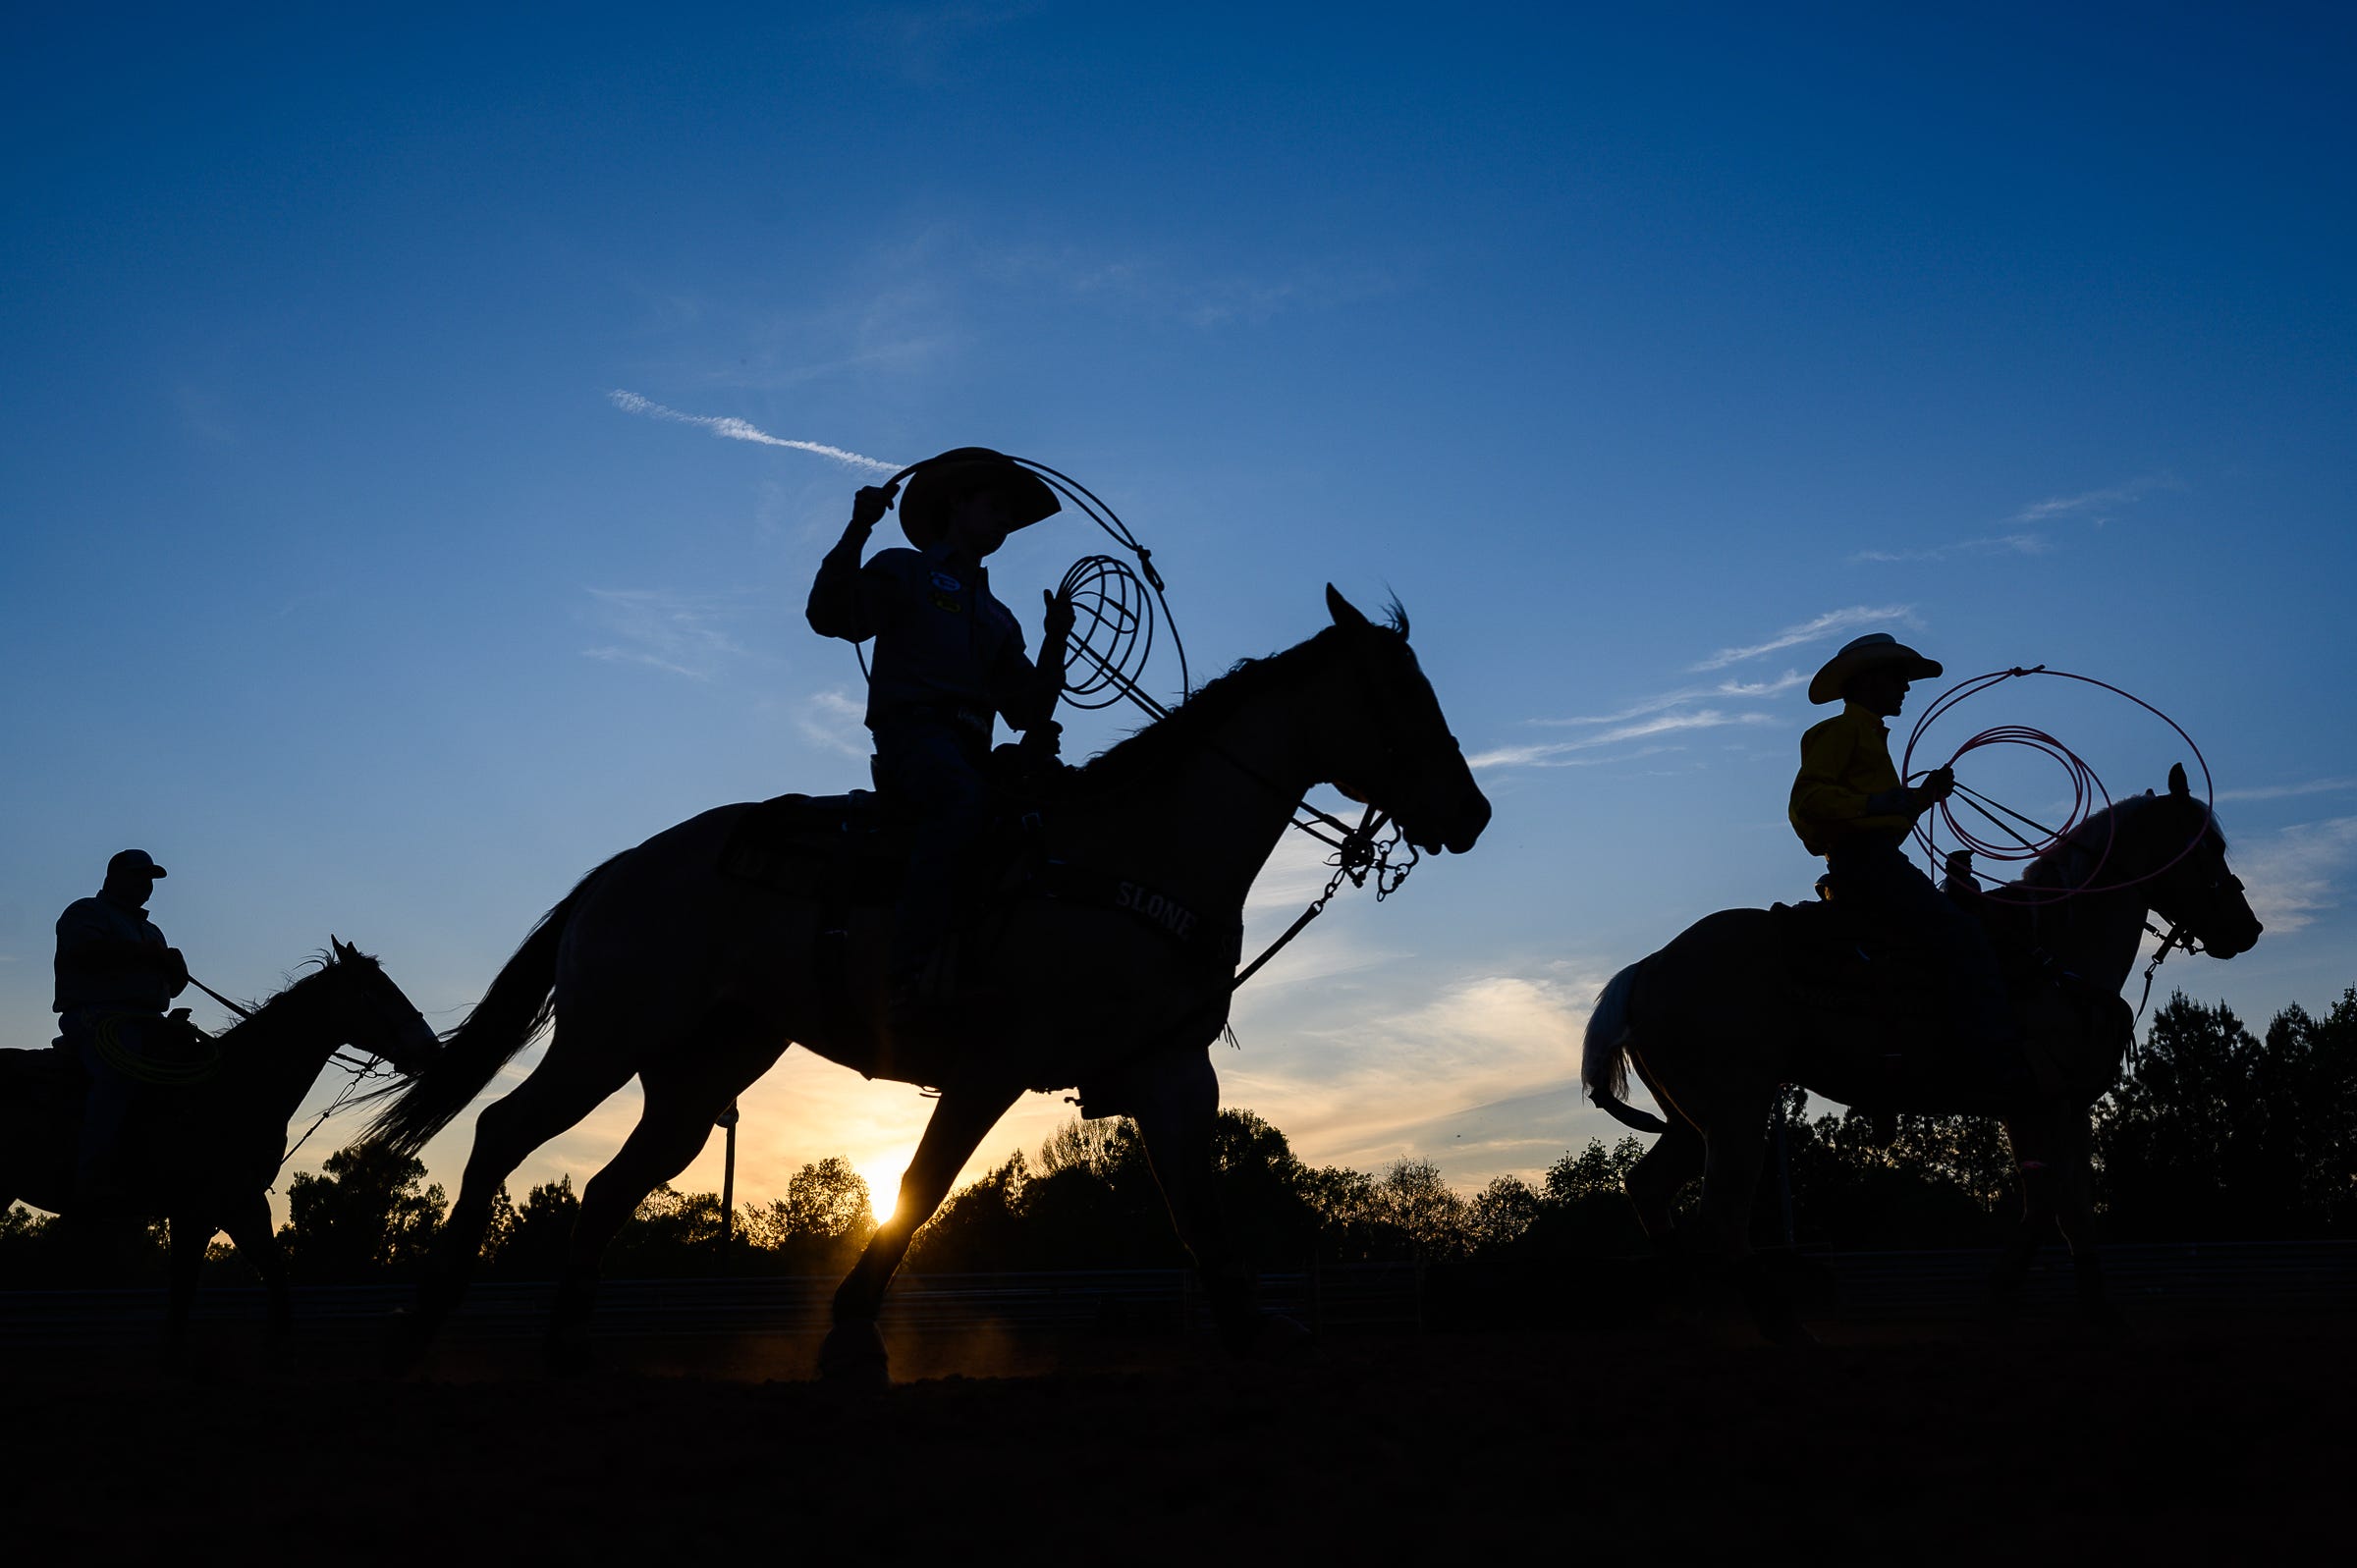 South Carolina high school rodeo How a sport shapes character